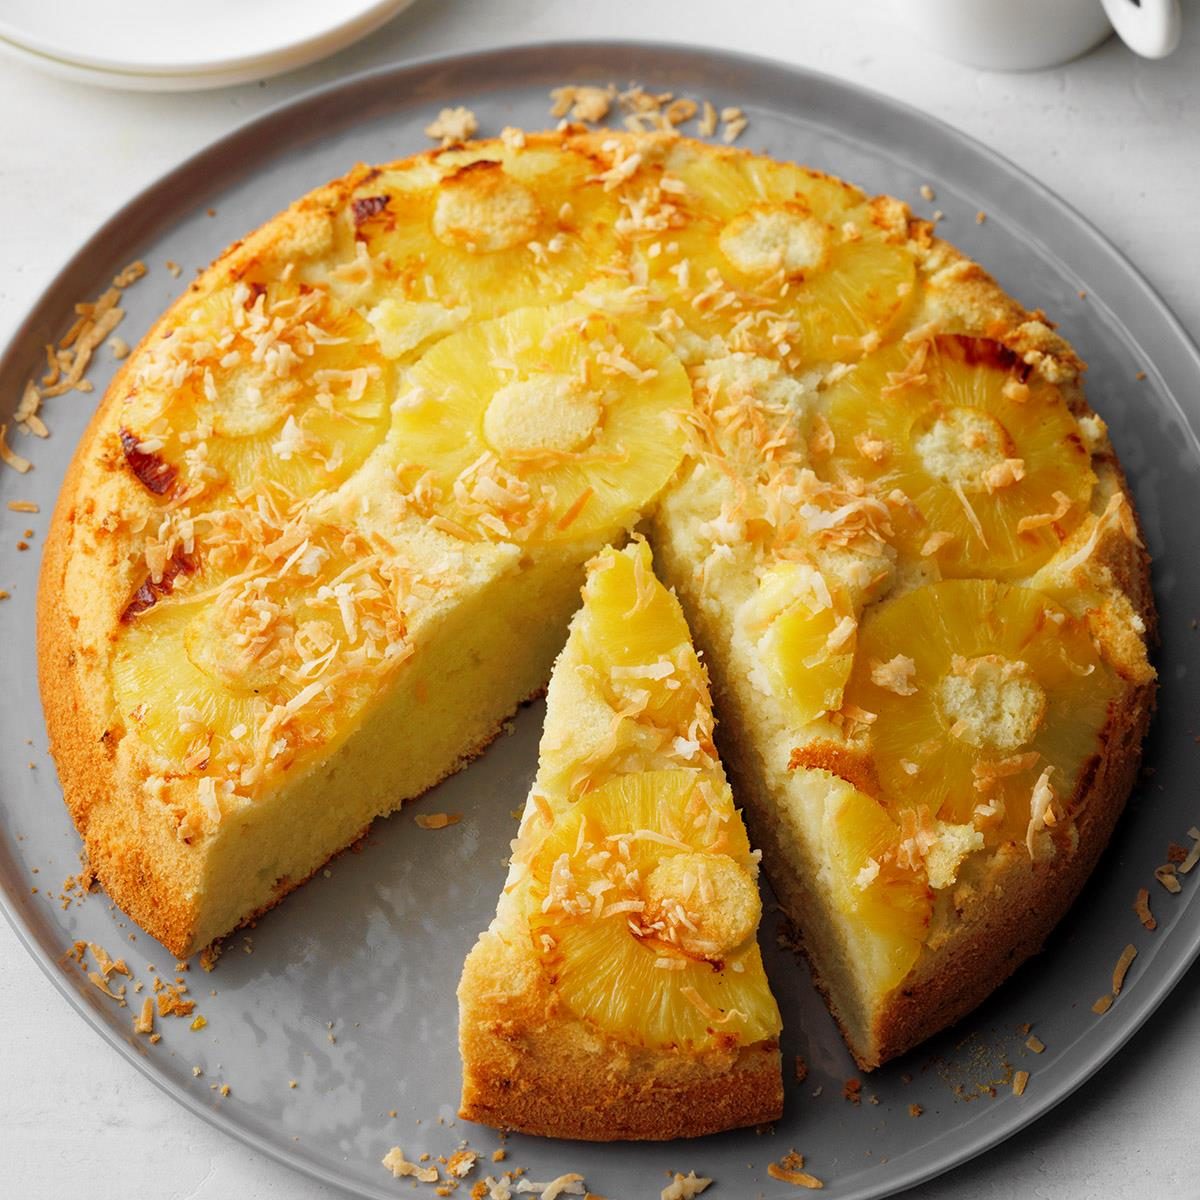 Pineapple Coconut Upside-Down Cake Recipe: How to Make It